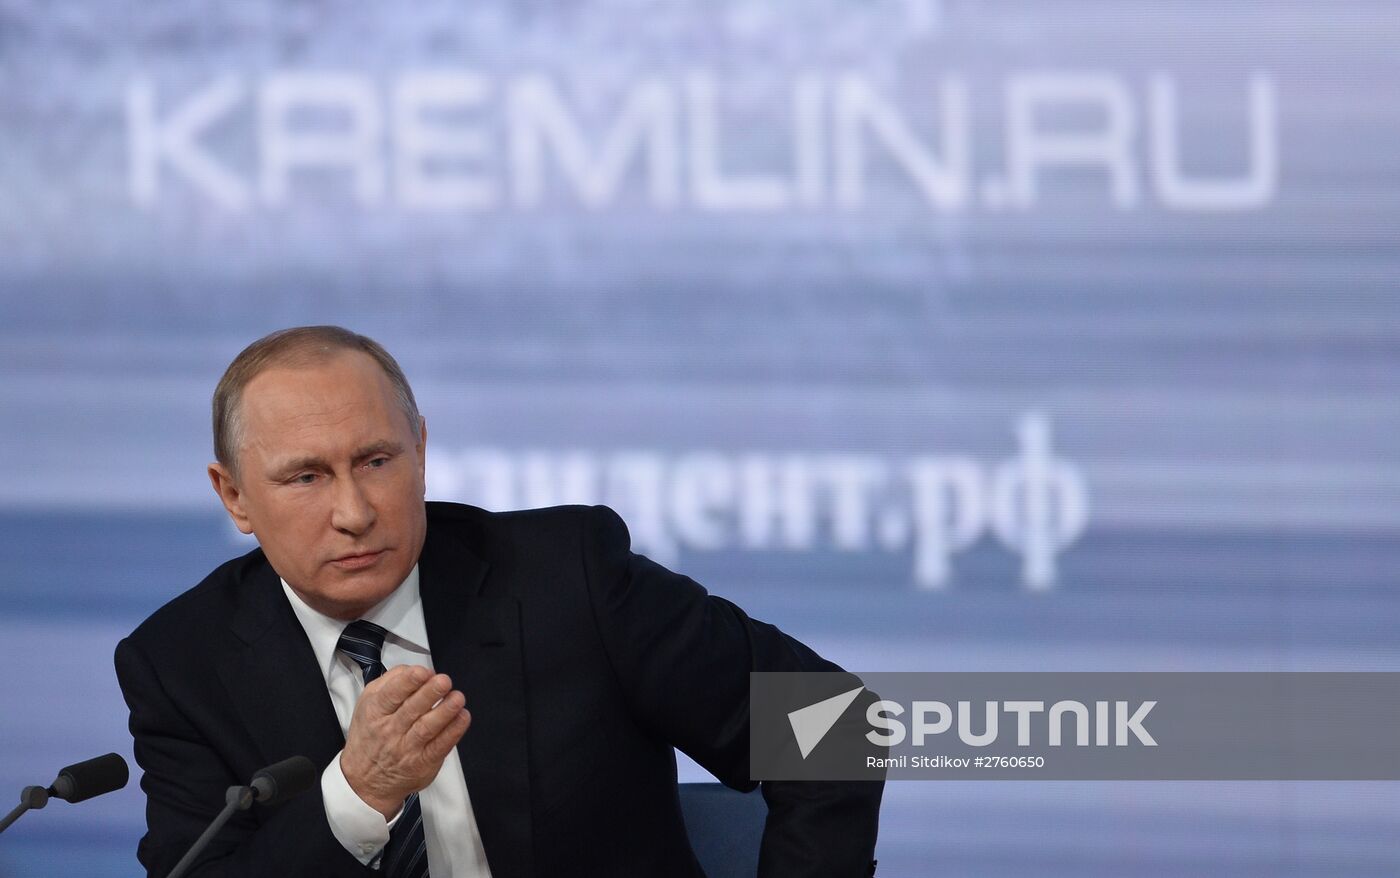 11th annual end-of-the-year press conference by President Vladimir Putin